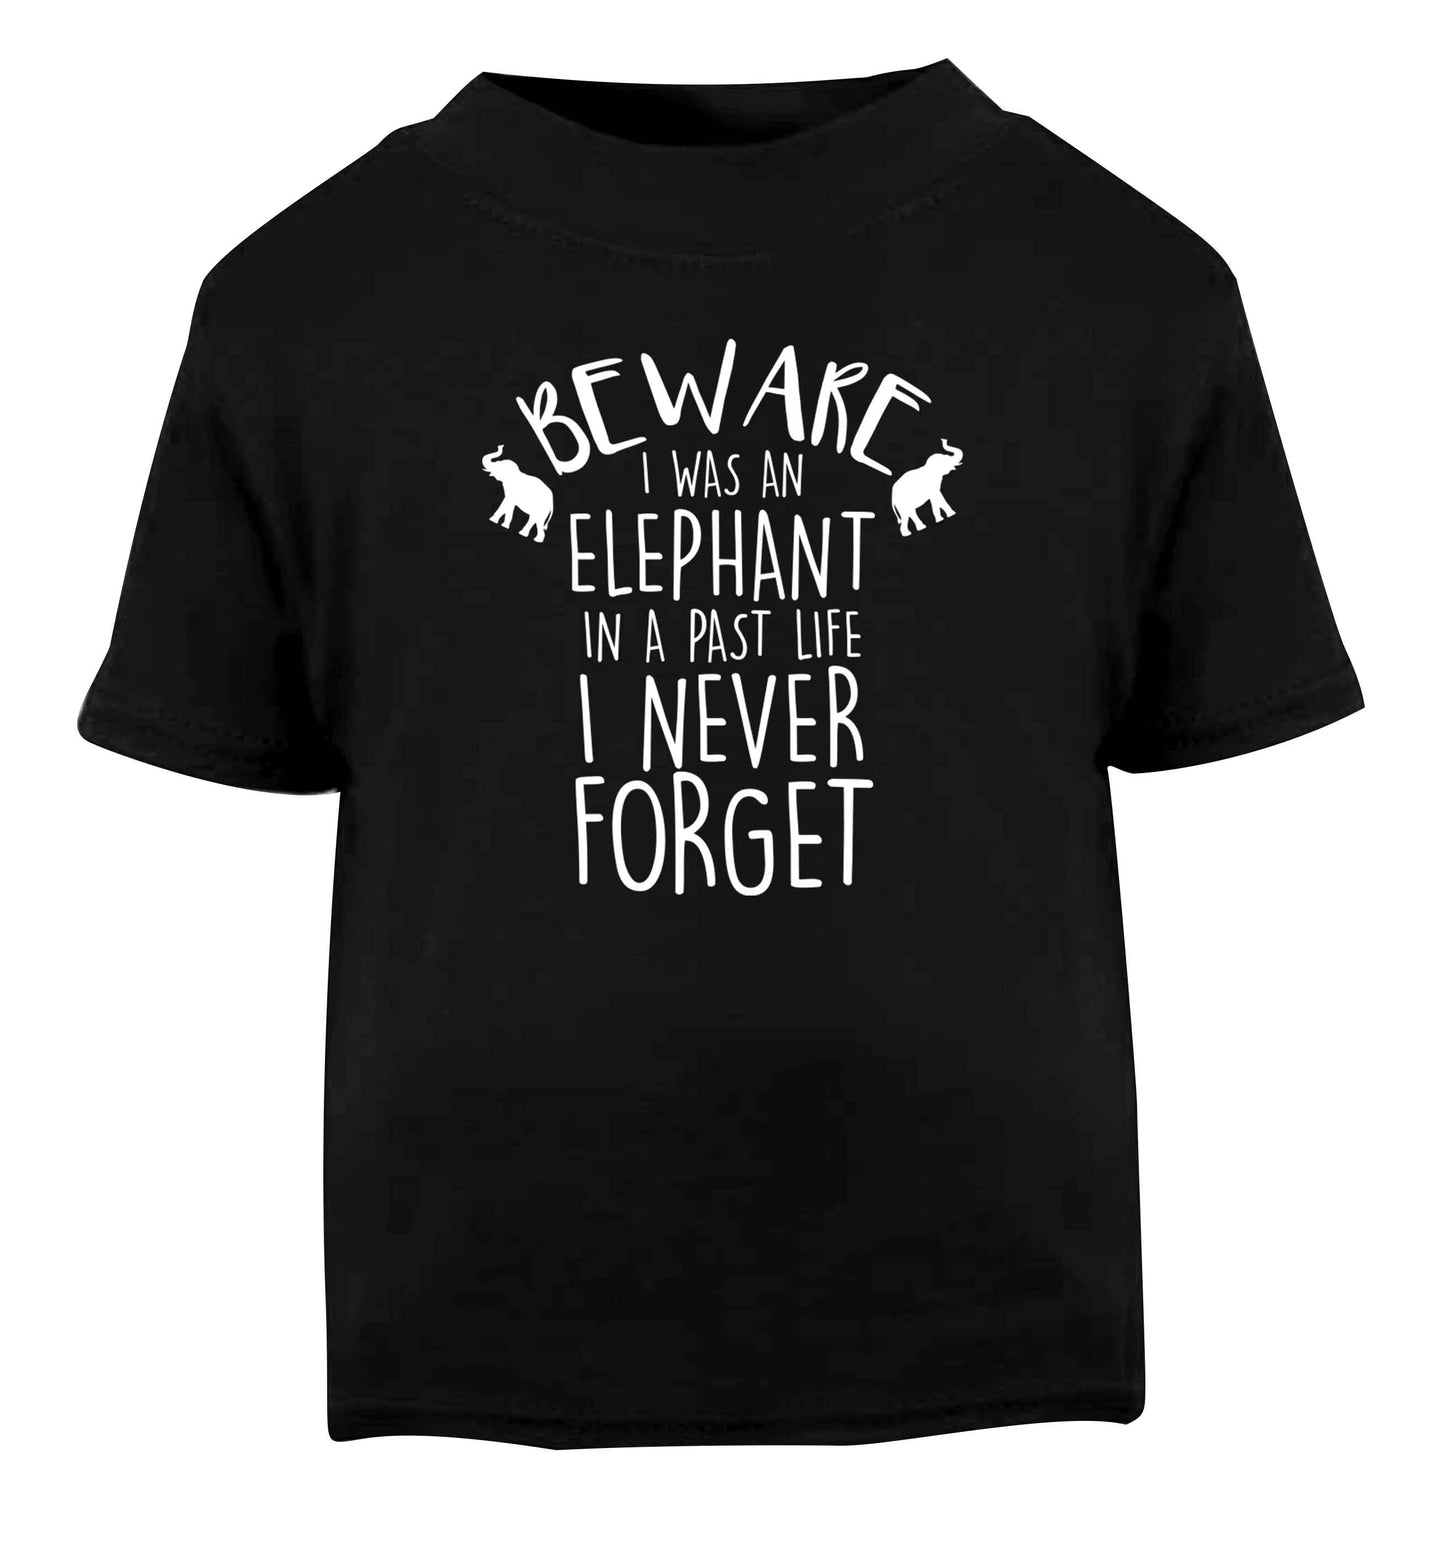 Beware I was an elephant in my past life I never forget Black Baby Toddler Tshirt 2 years